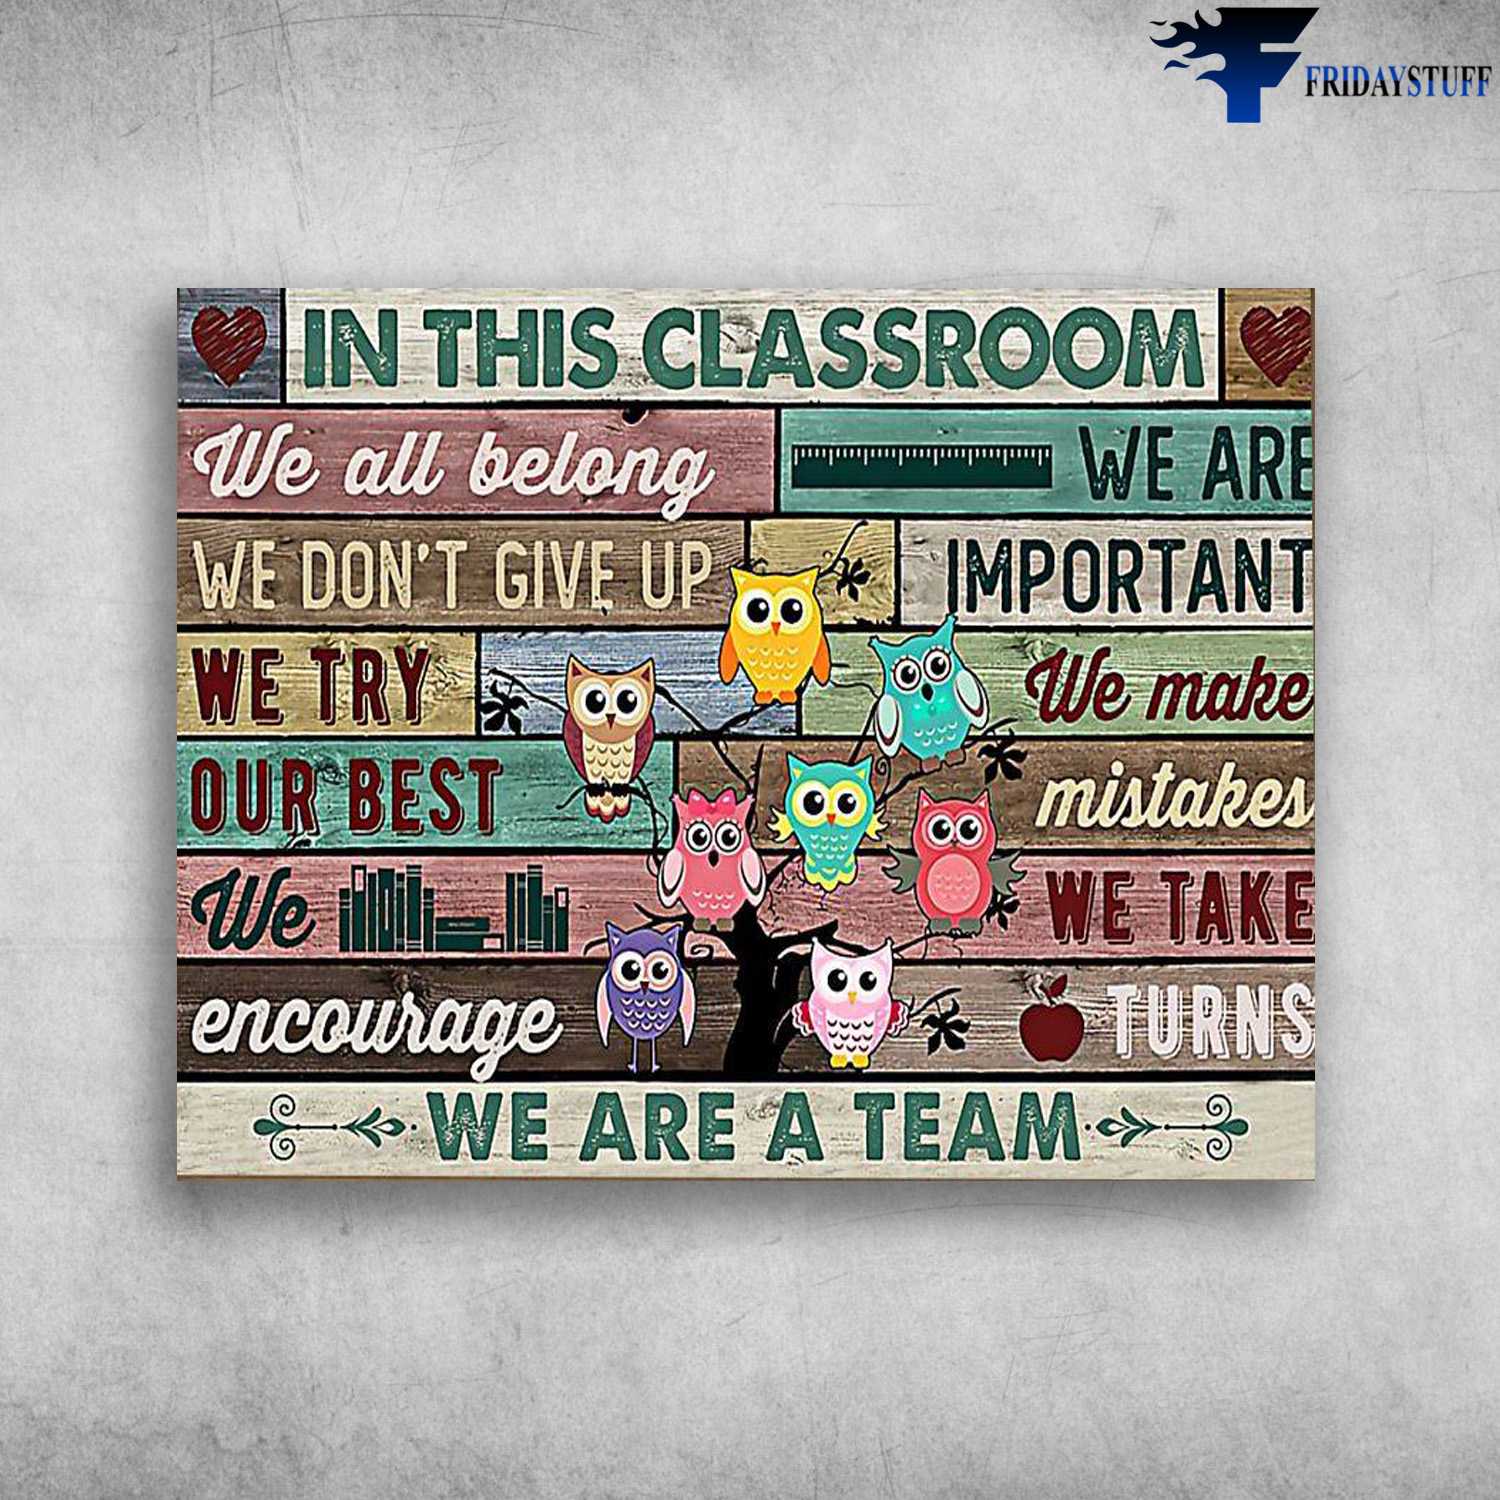 Owl Class, Classroom Poster, In This Classroom, We All Belong, We Don't Give Up, We Try Our Best, We Encourage, We Are A Team